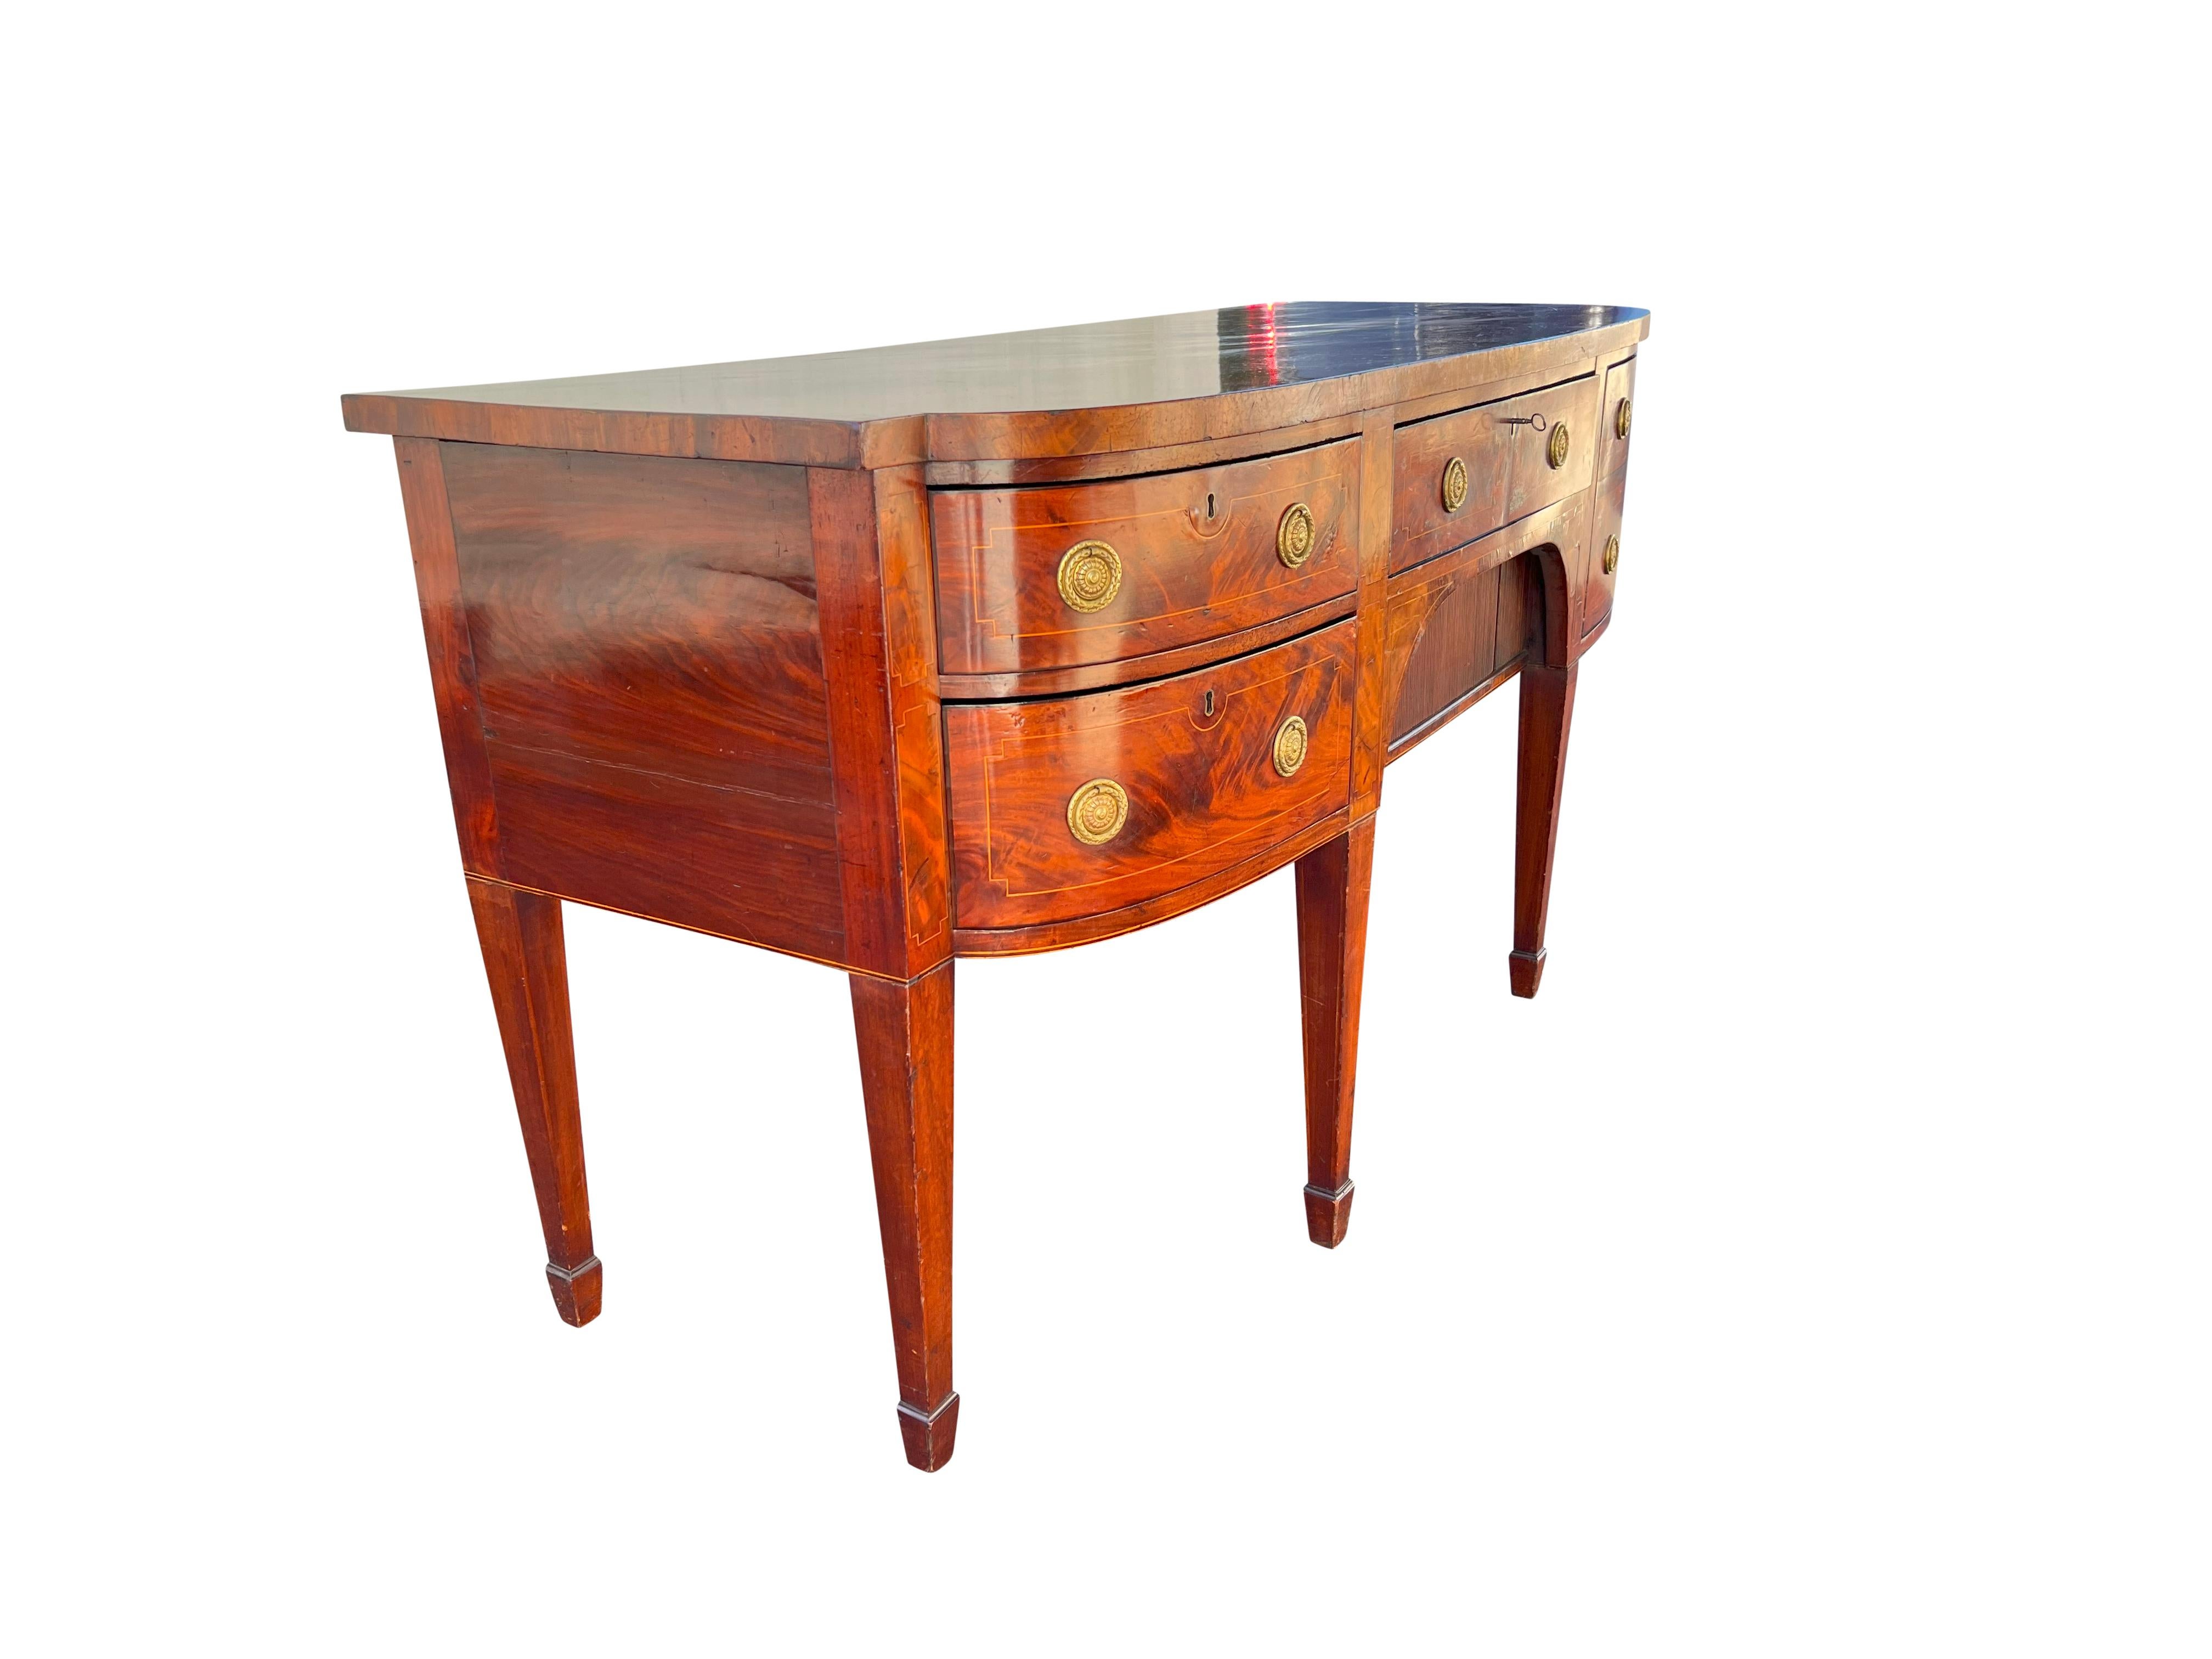 With a rectangular top with rounded ends over a central drawer flanked by a deep bottle drawer and two drawers with tambour door well below. Raised on square tapered legs and spade feet.